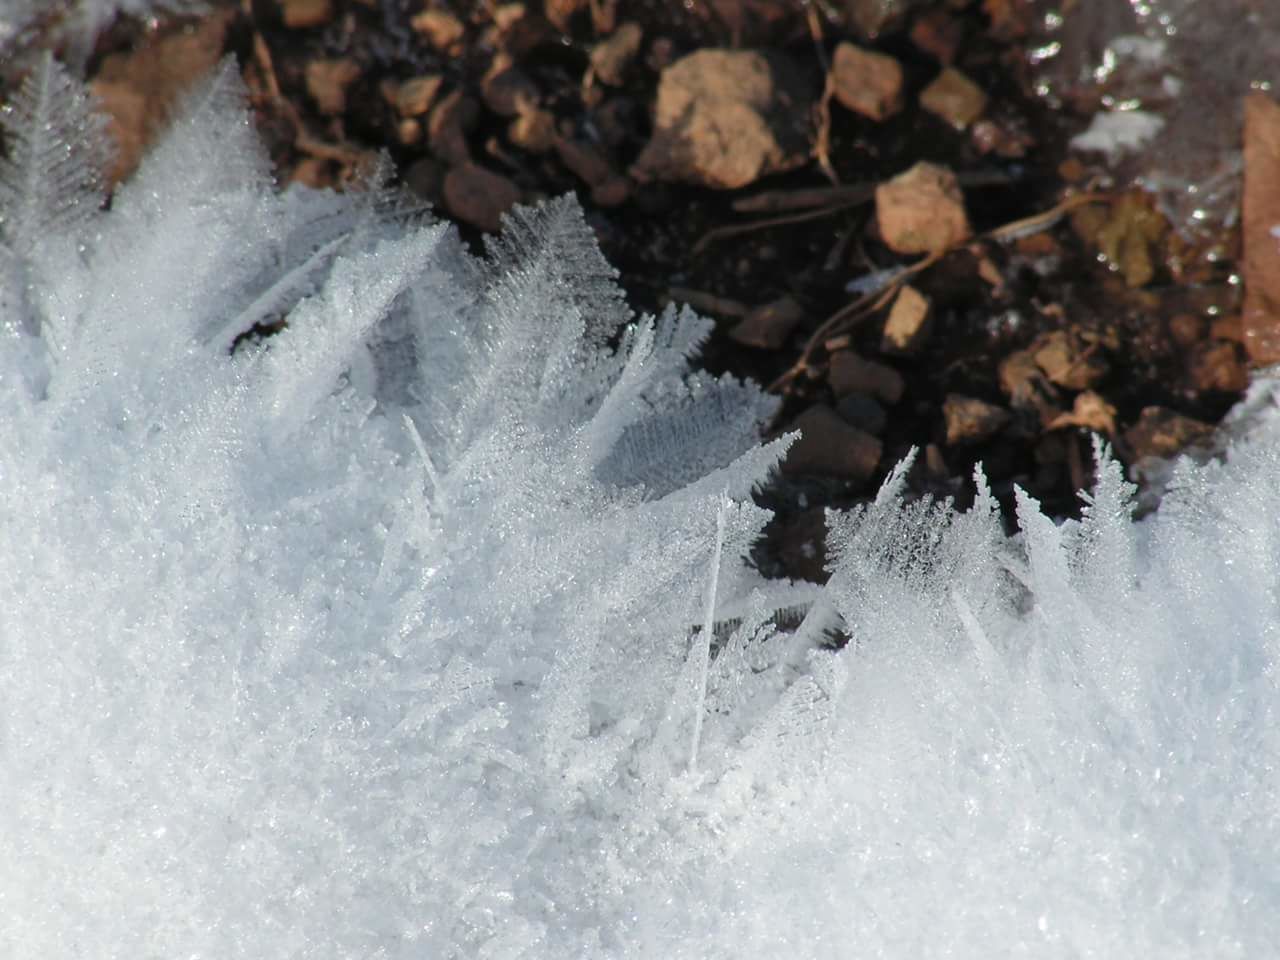 CLOSE-UP OF WATER IN SHALLOW